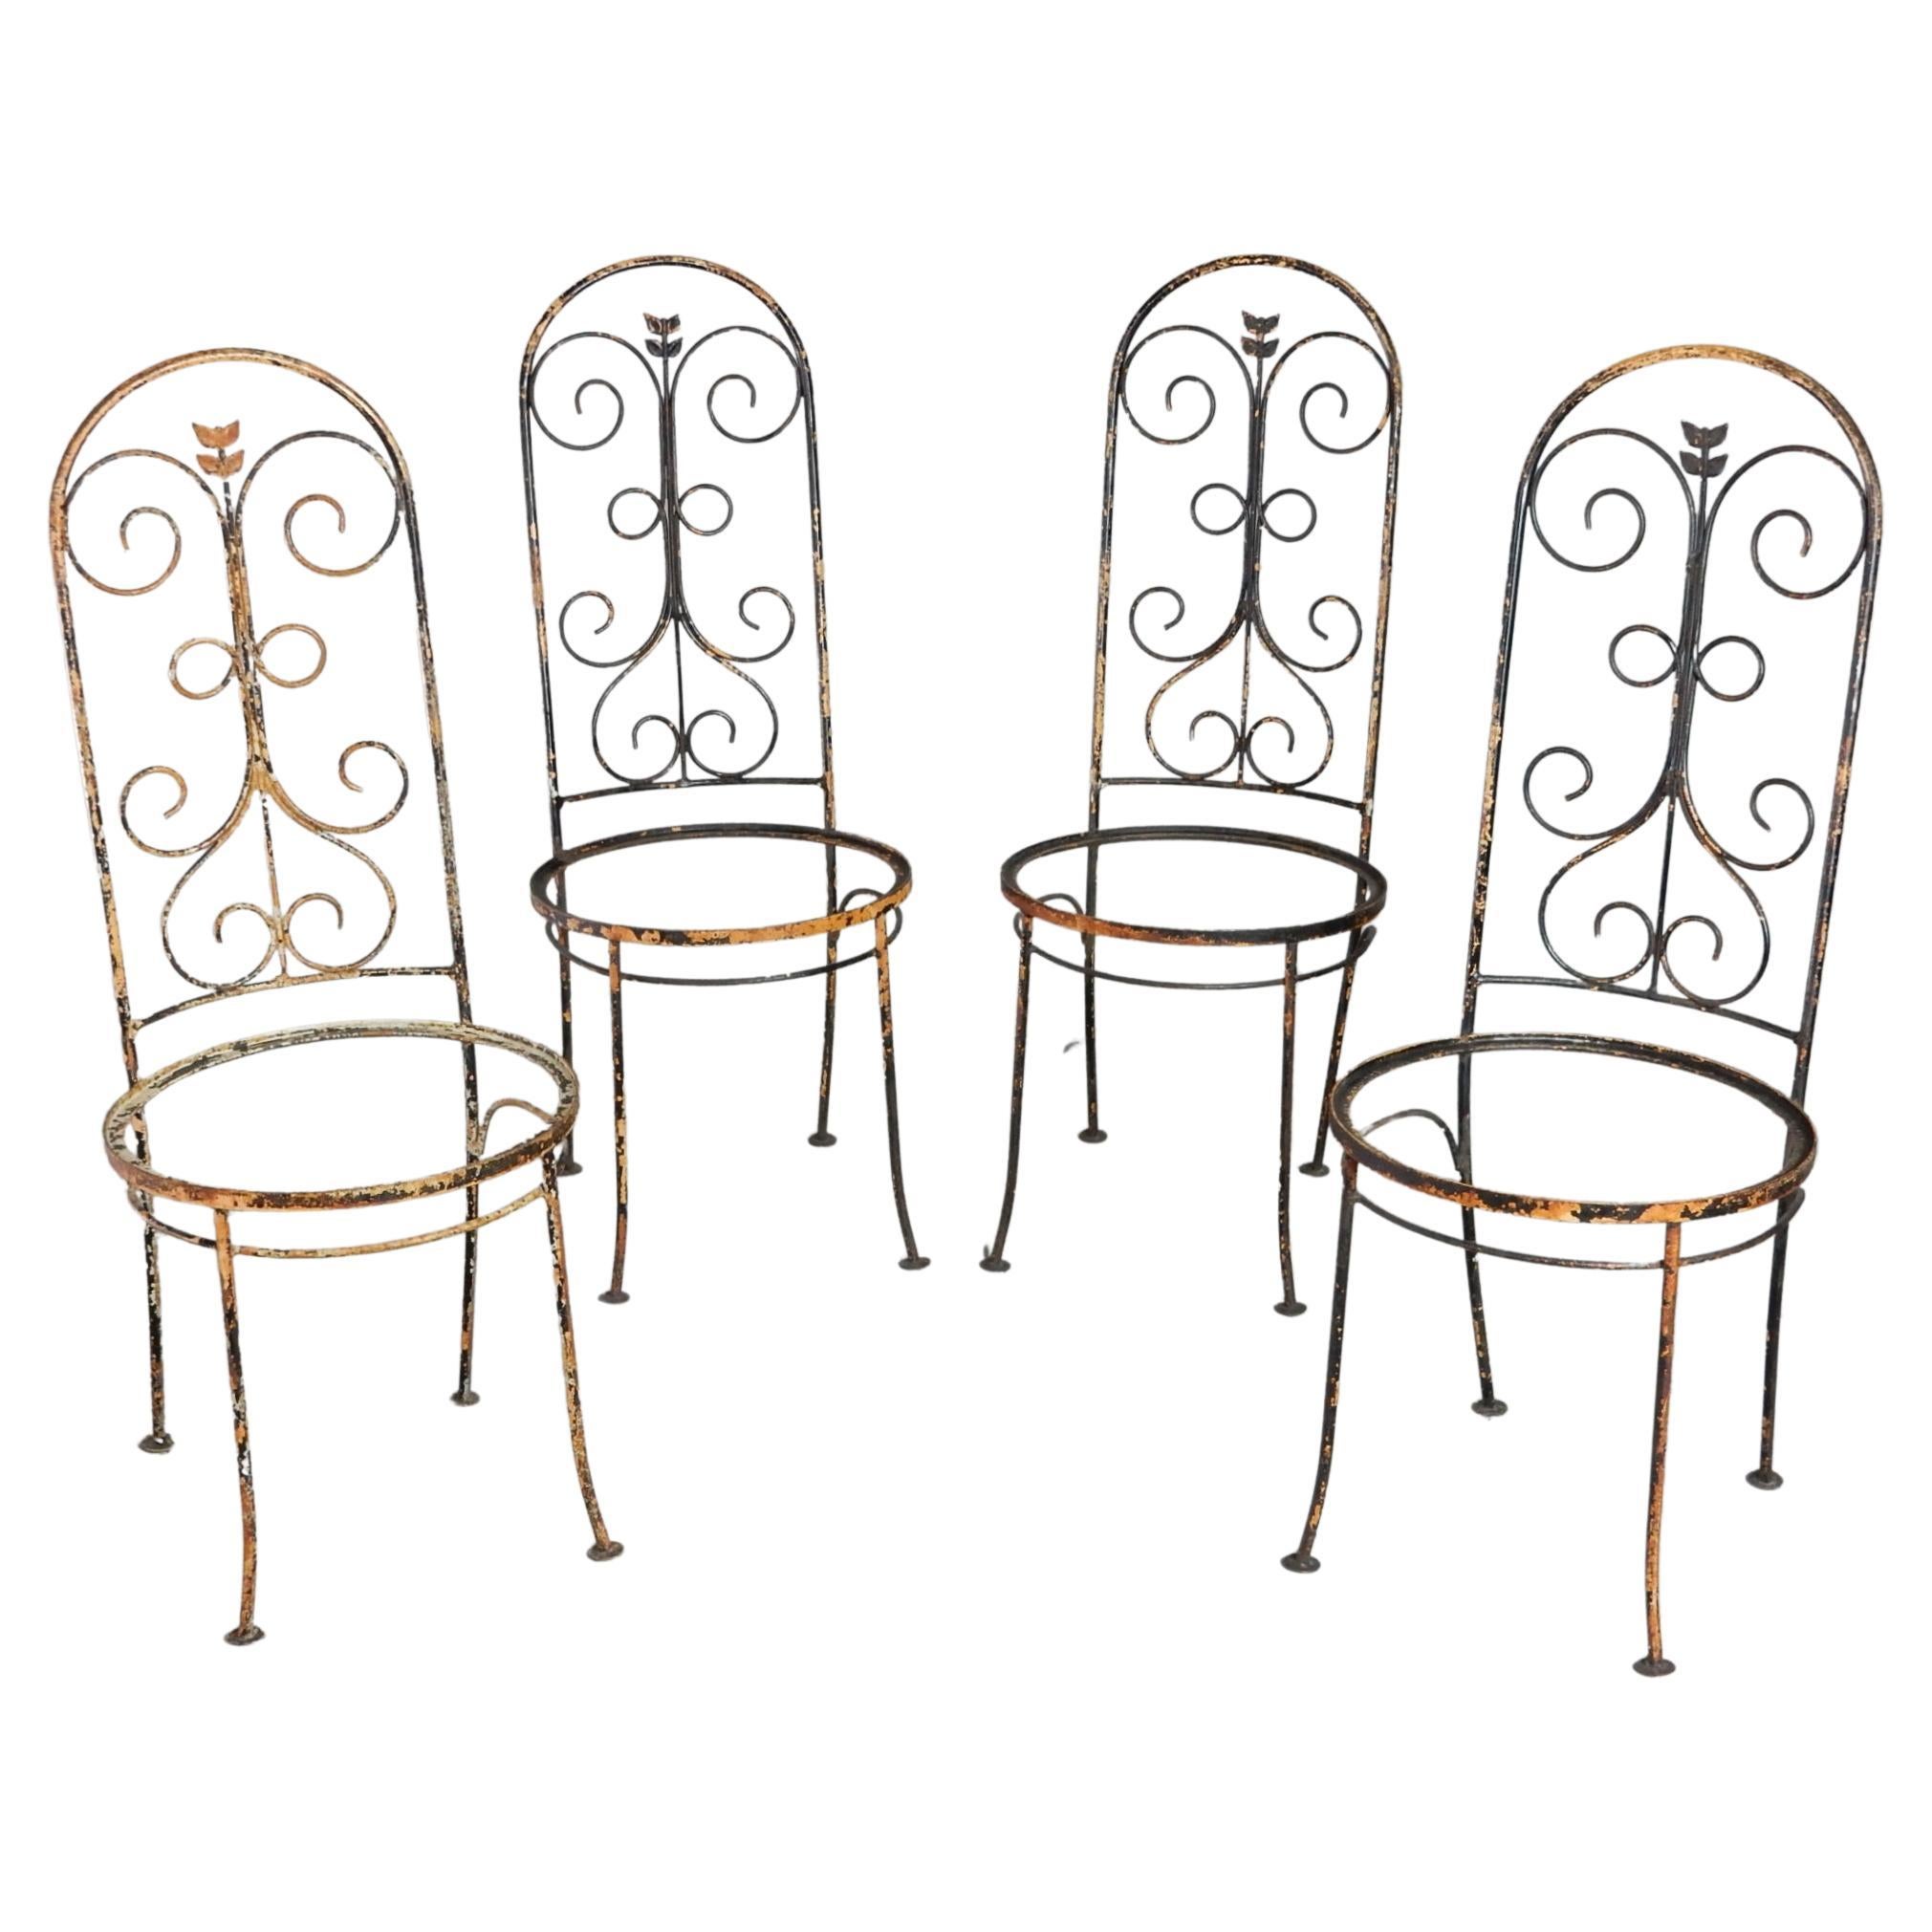 1940's French Artistic Iron Tall Back Garden Patio Chairs